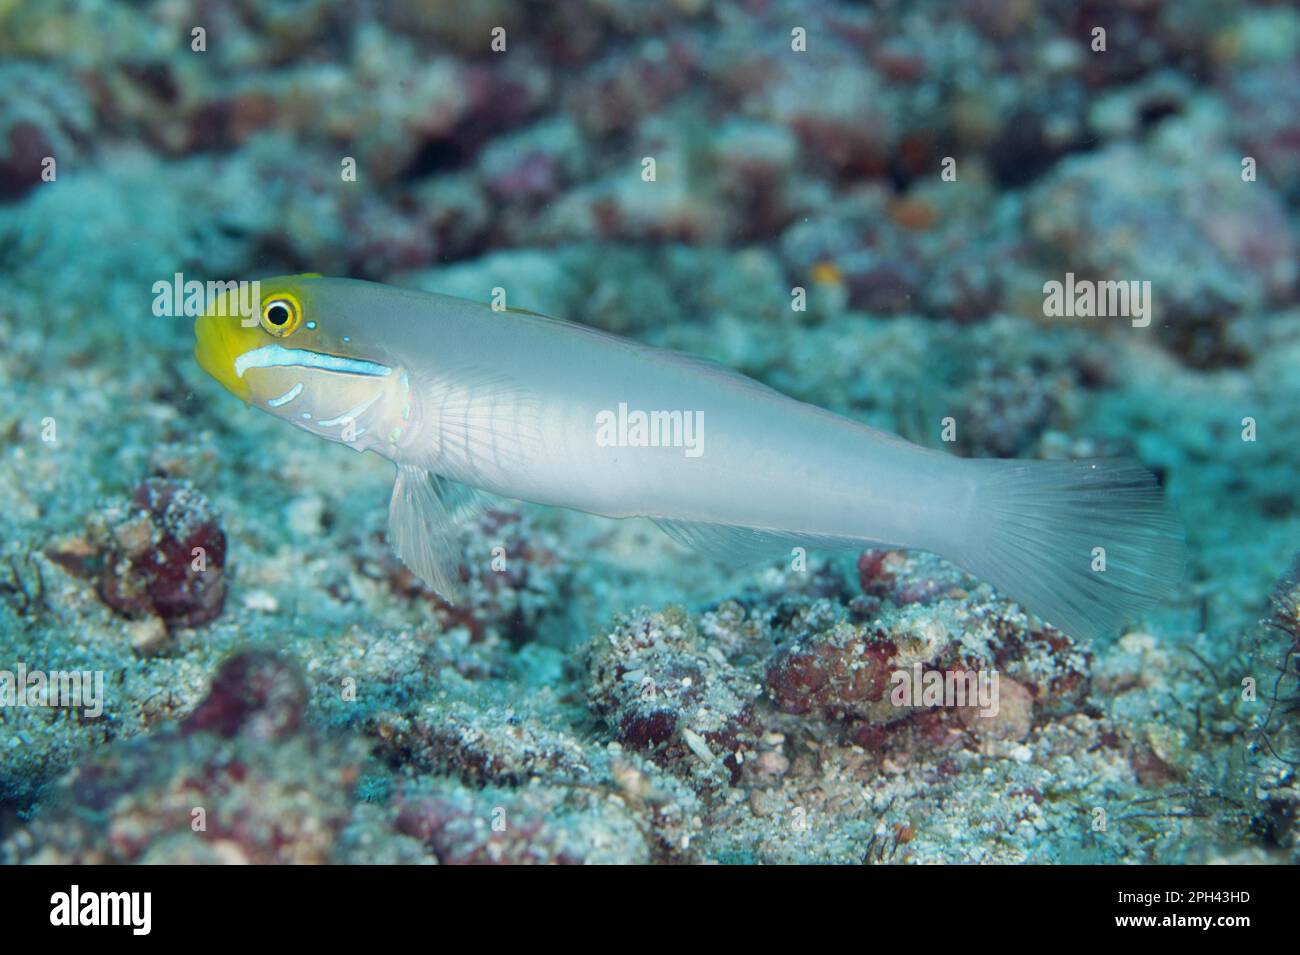 Golden-fronted Sand Goby, Golden-fronted Sleeper Goby (Valenciennea strigata), Golden-fronted Sleeper Goby, Golden-fronted Sand Goby, Golden-fronted Stock Photo